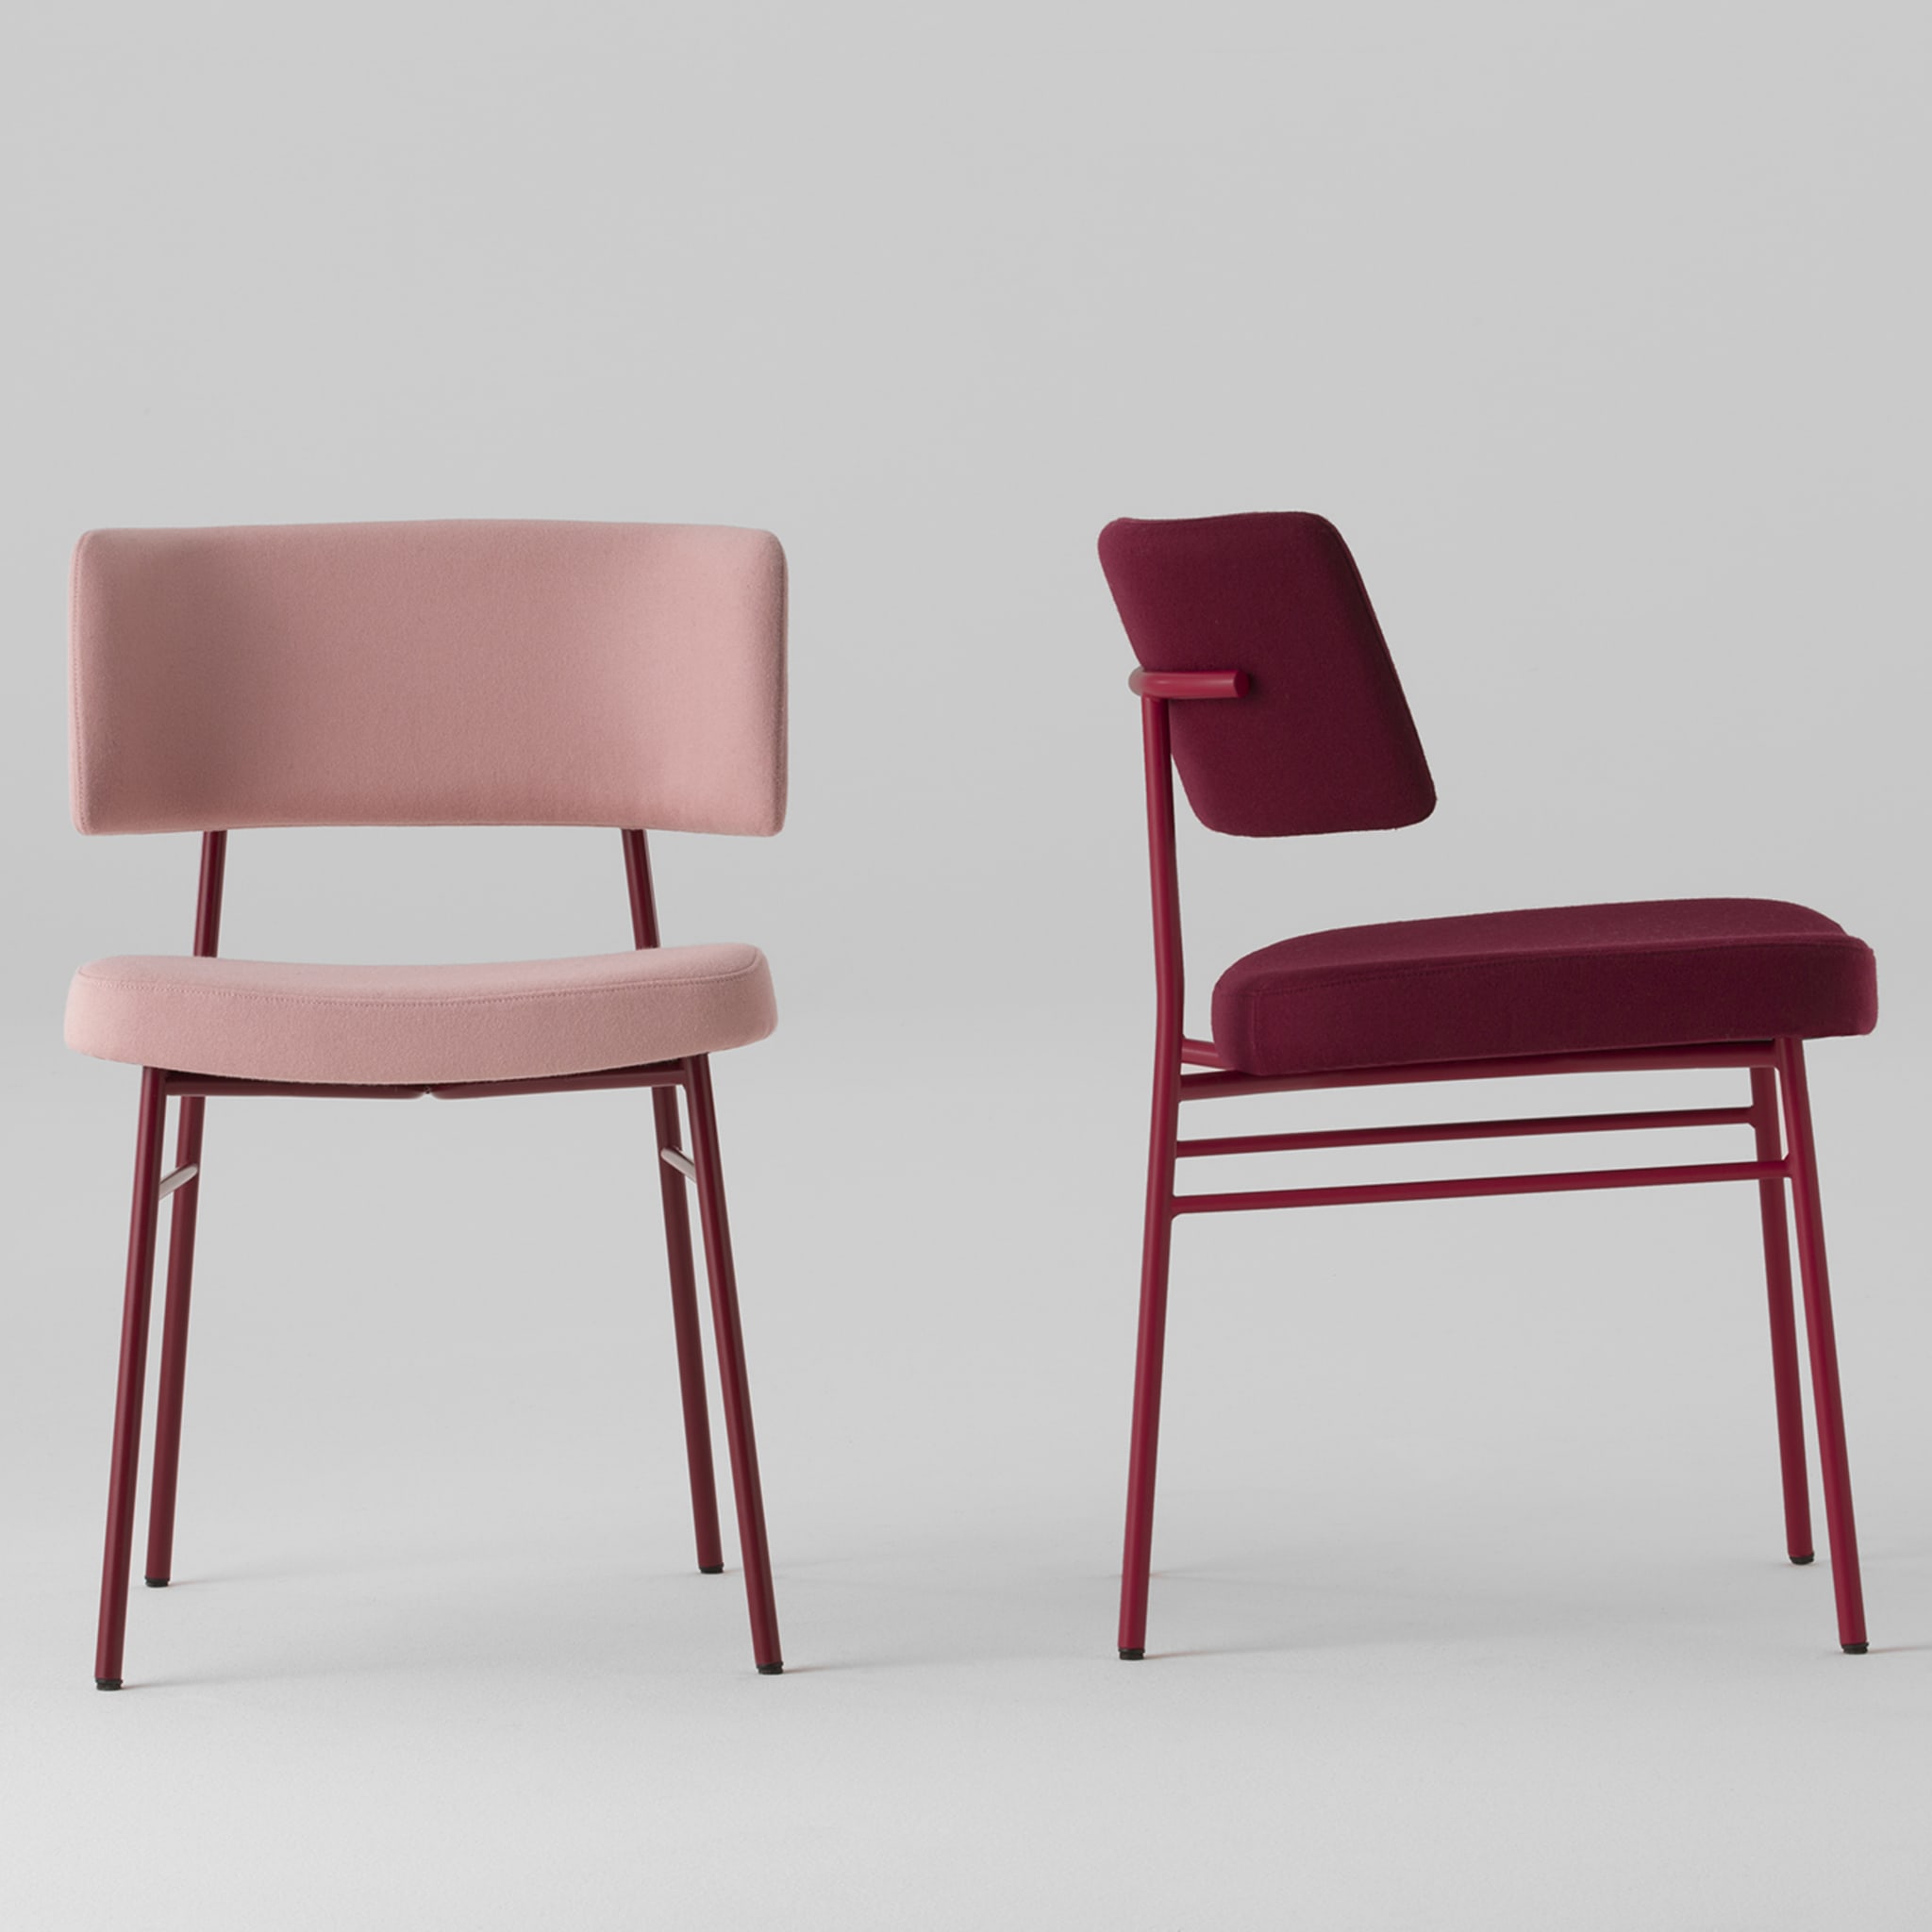 Marlen Pink and Burgundy Chair by EP Studio - Alternative view 1